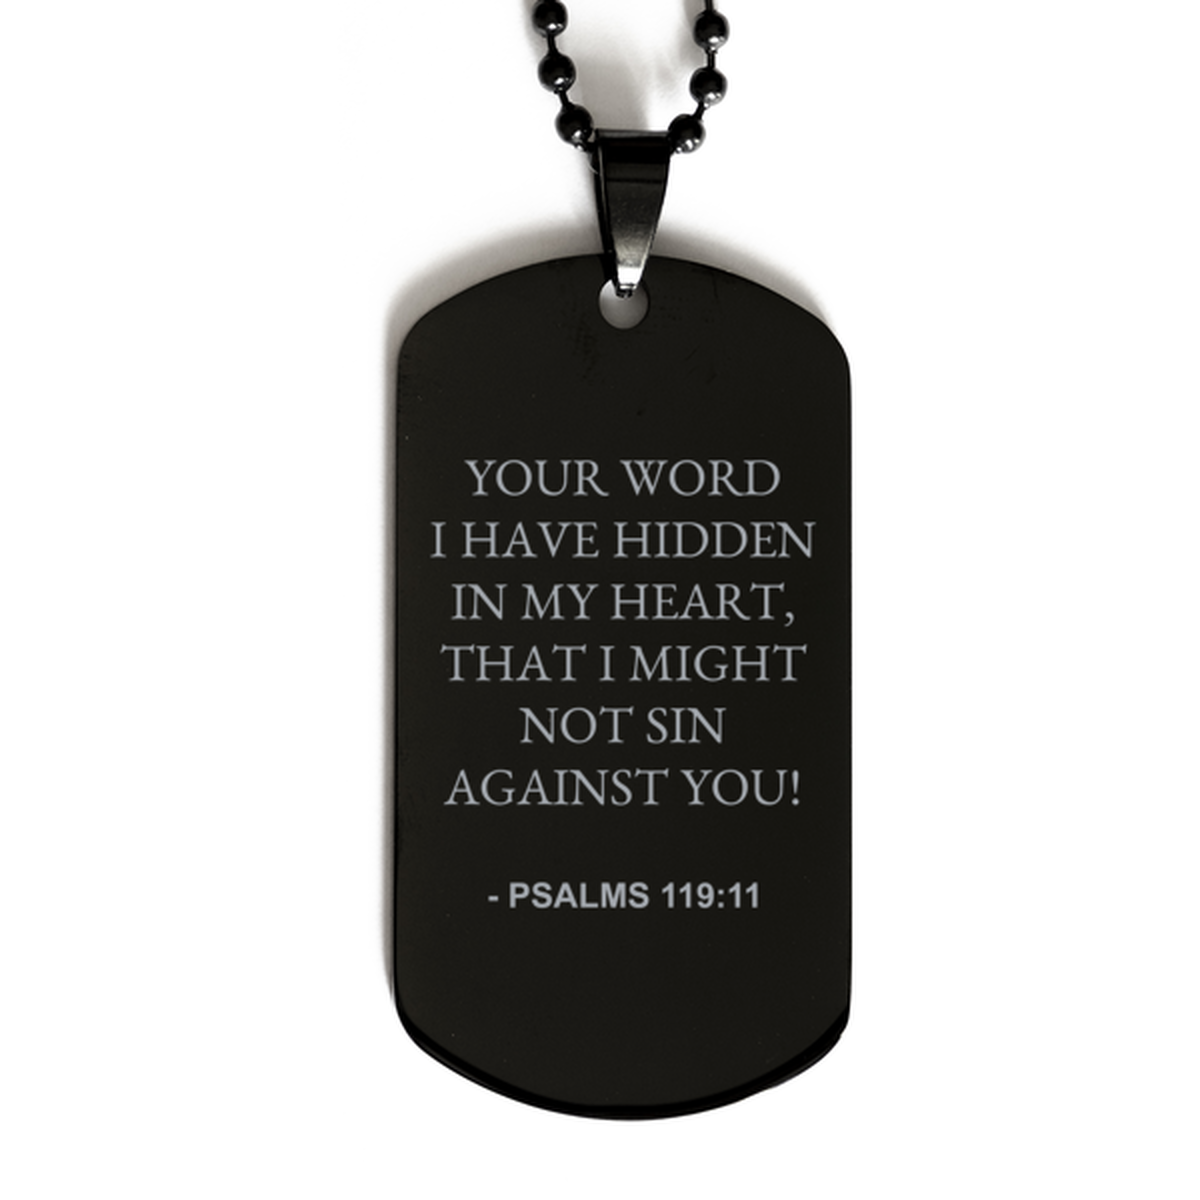 Bible Verse Black Dog Tag, Psalms 119:11 Your Word I Have Hidden In My Heart, Christian Inspirational Necklace Gifts For Men Women